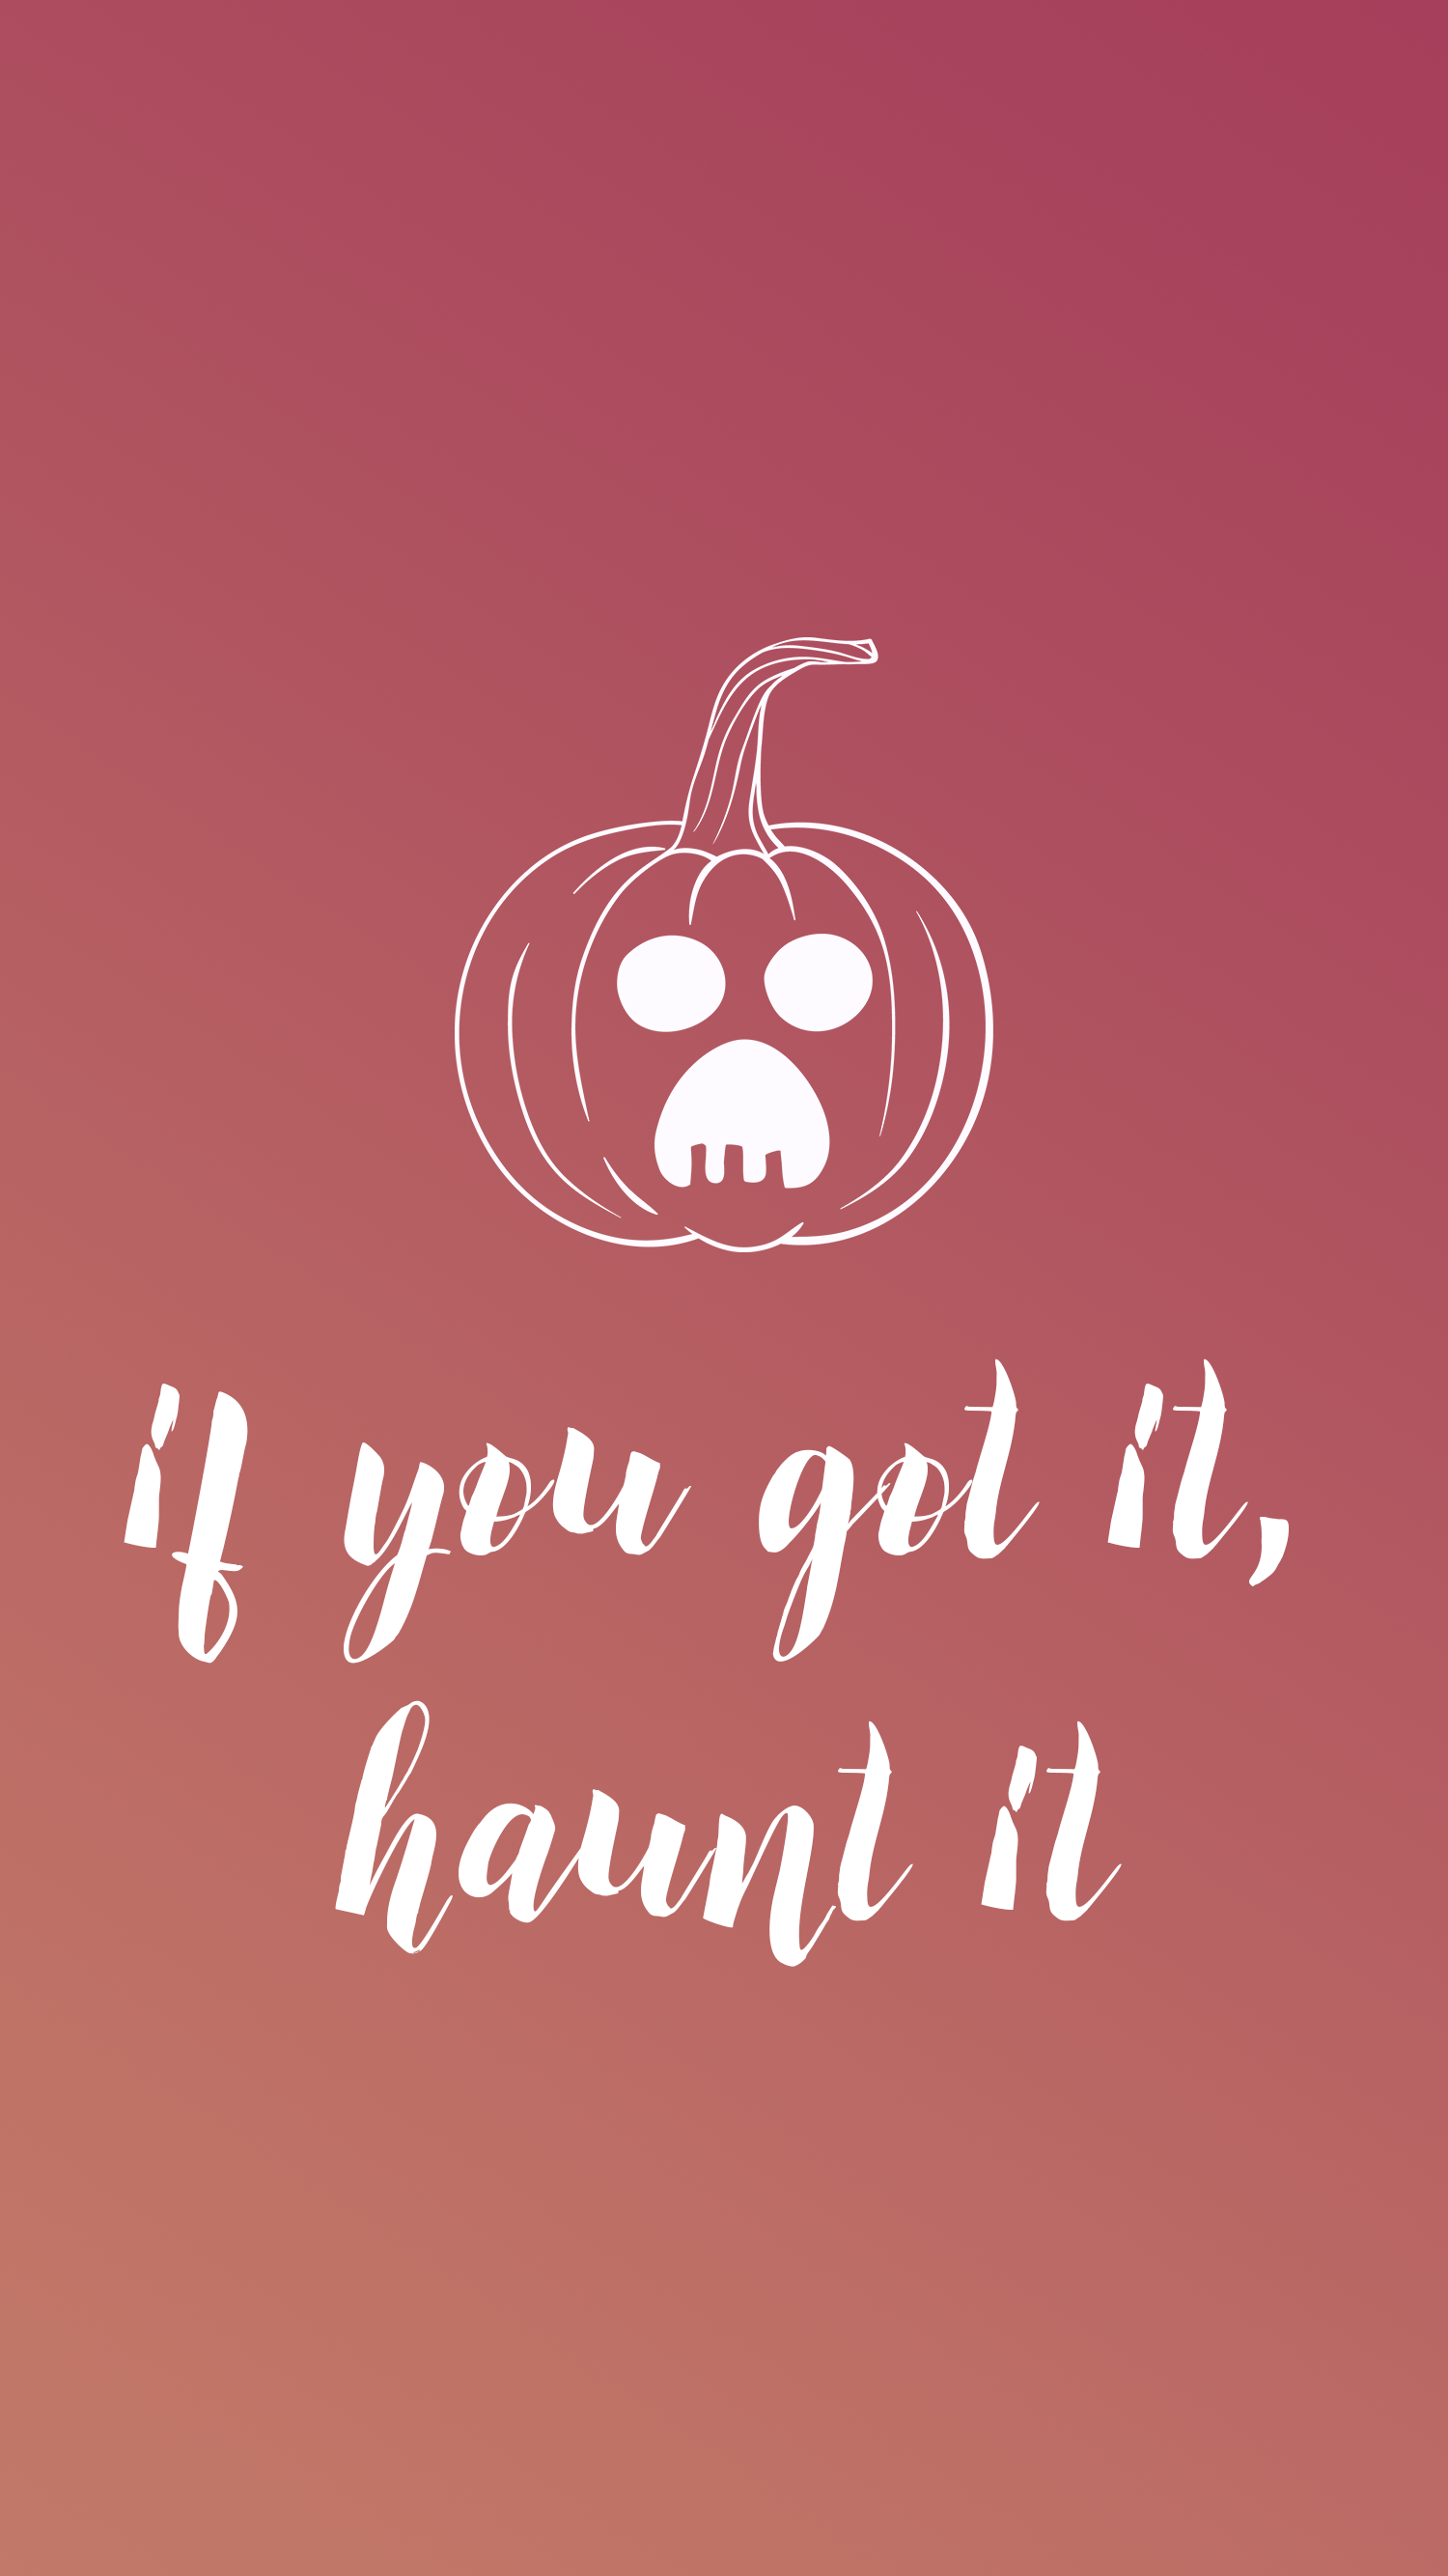 Snarky Halloween Phone Wallpaper for Basic Witches. Halloween wallpaper iphone, Halloween wallpaper, Witch wallpaper